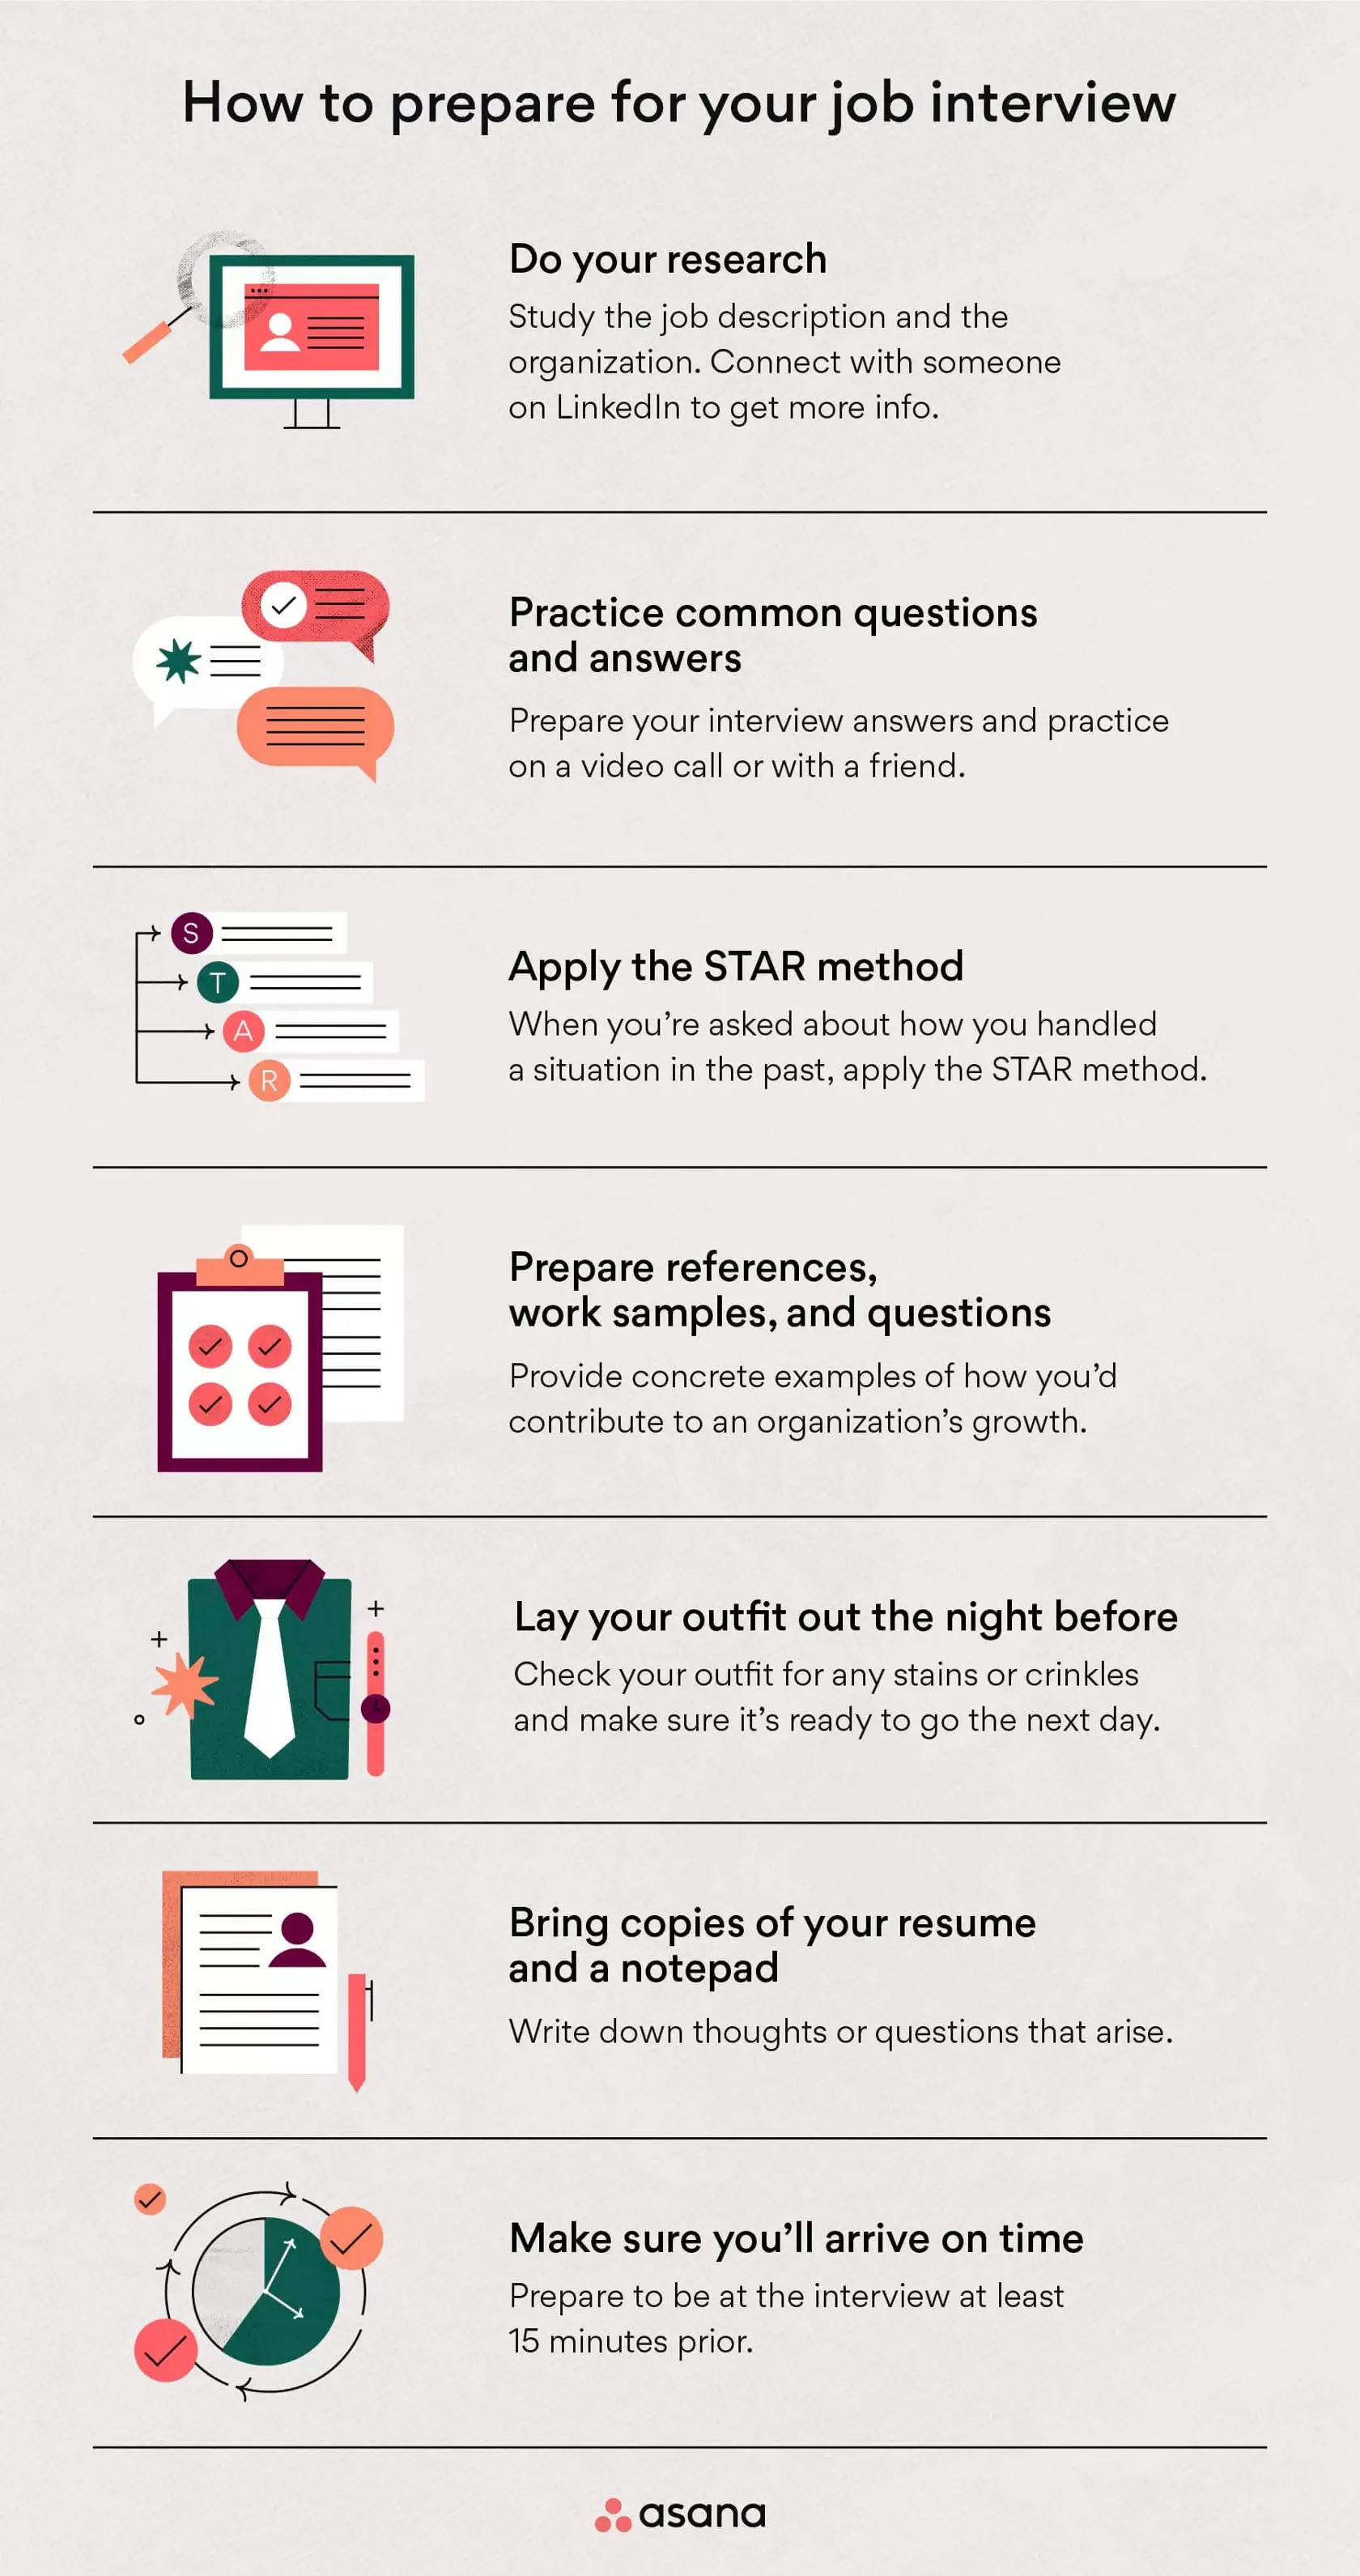 [inline illustration] how to prepare for your job interview (infographic)